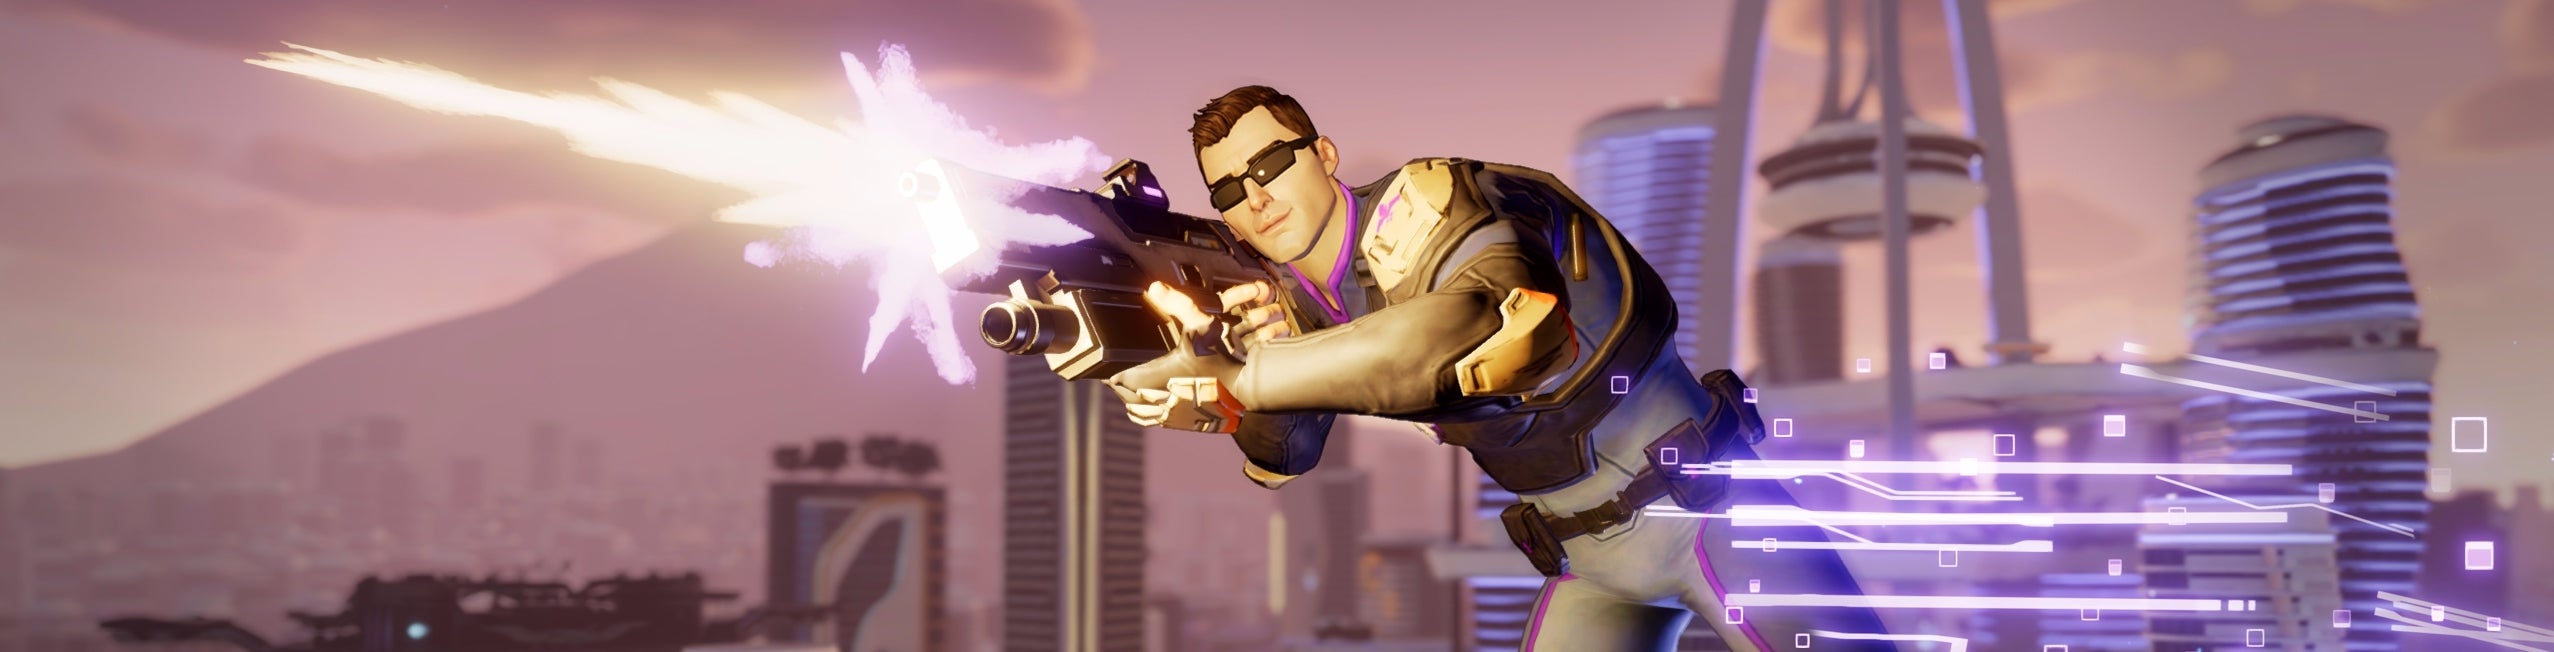 Image for Agents of Mayhem review